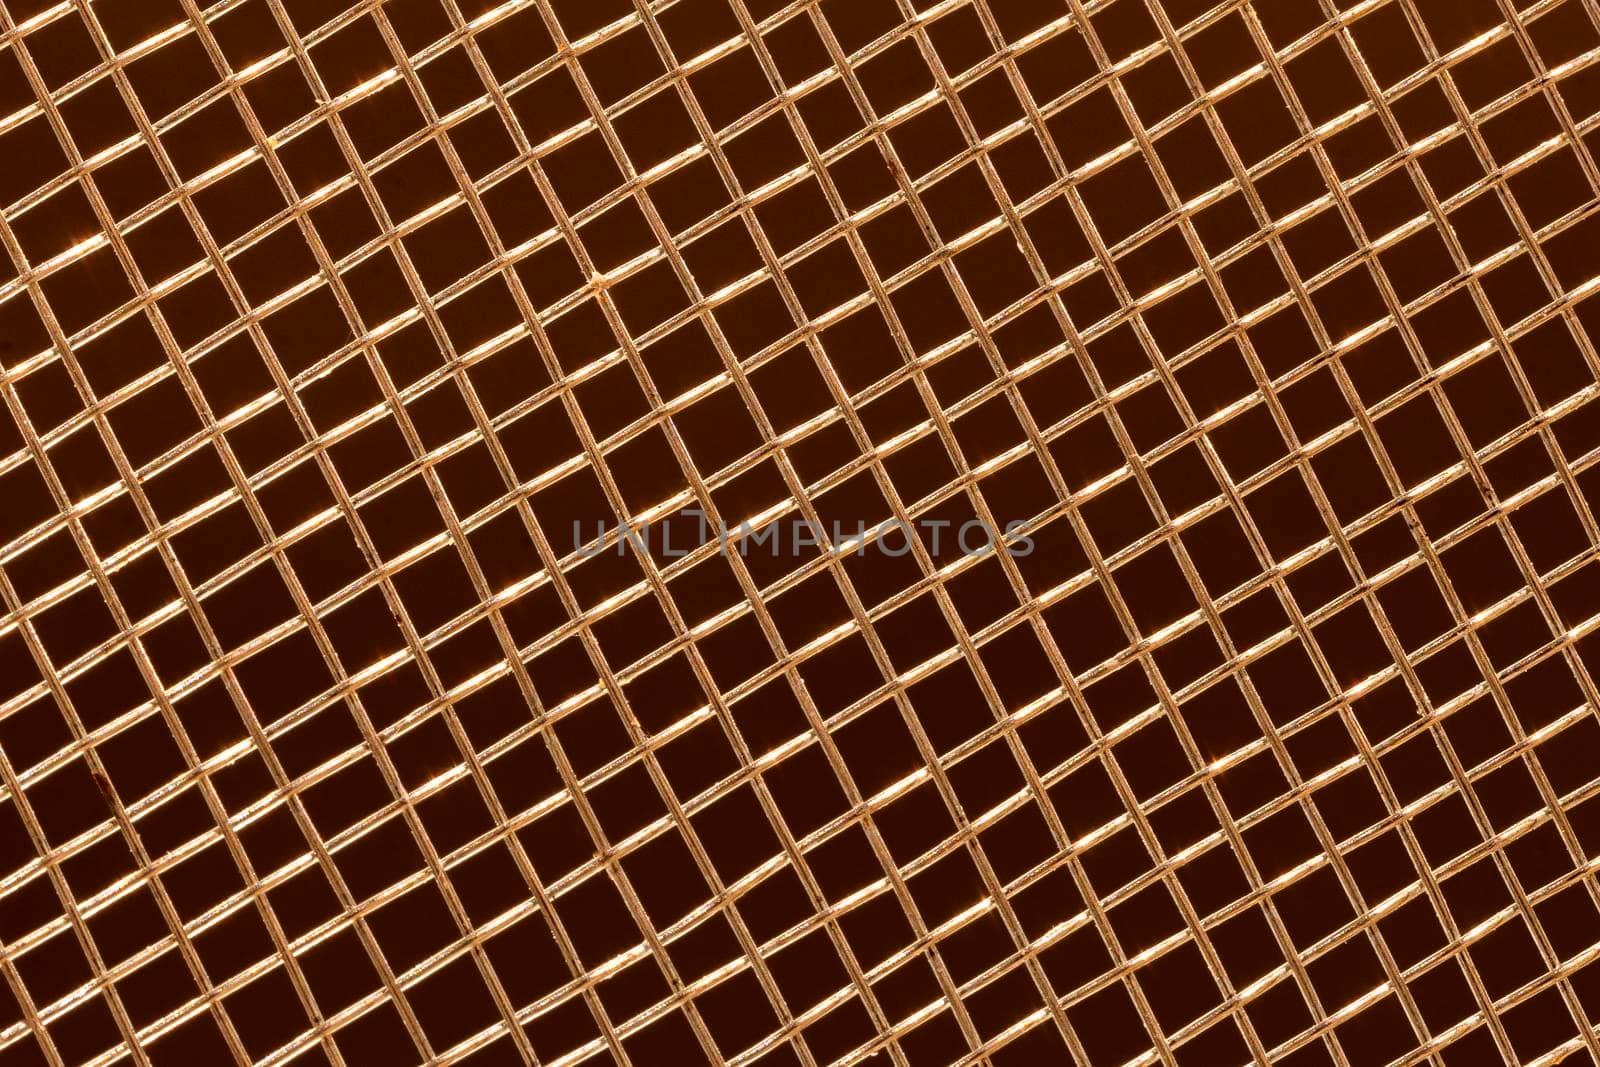 grid with a pattern of numerous small shaped cells on dark background, close view